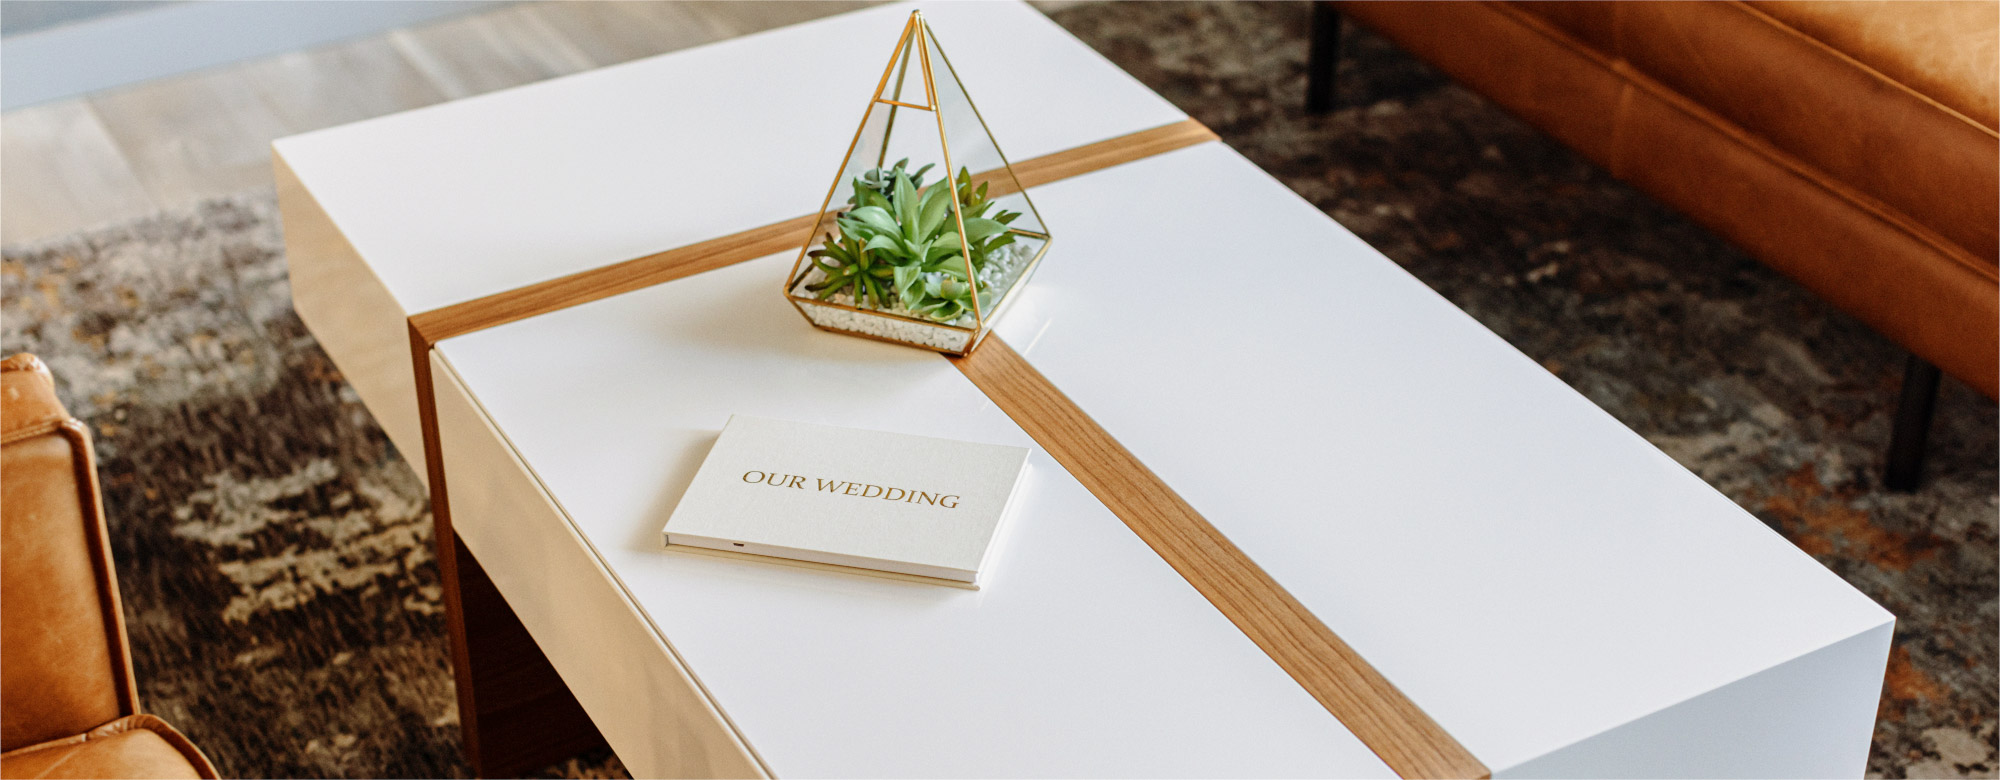 The Motion Books Wedding Video Album laying on a coffee table - The perfect coffee table video book that plays your wedding film.